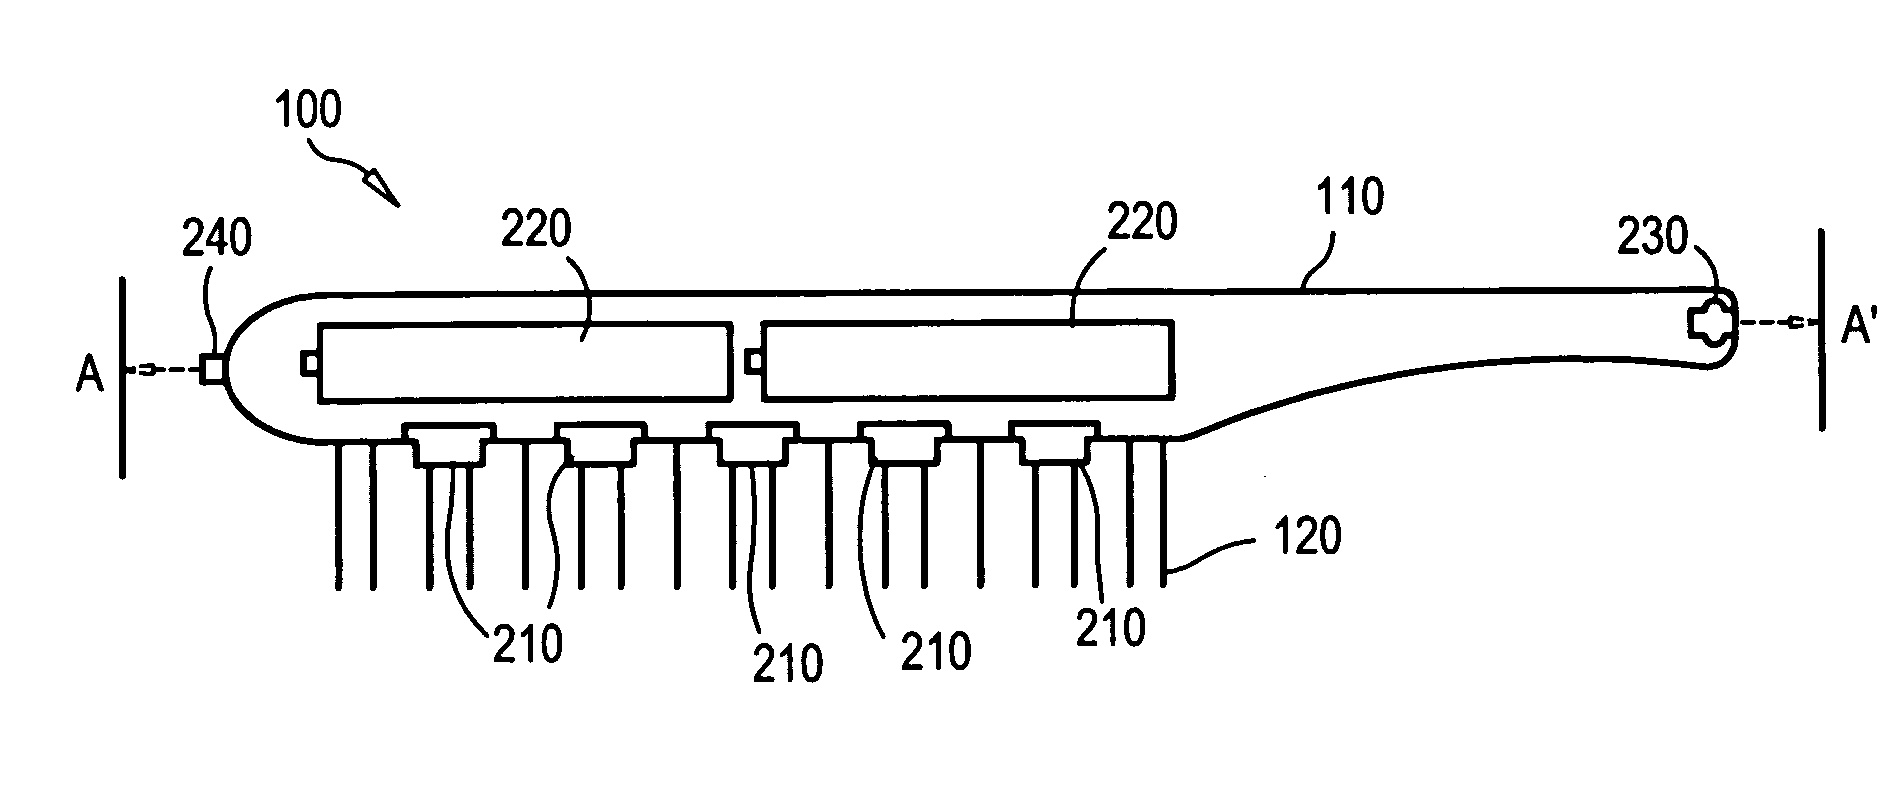 Hair restoration device and methods of using and manufacturing the same